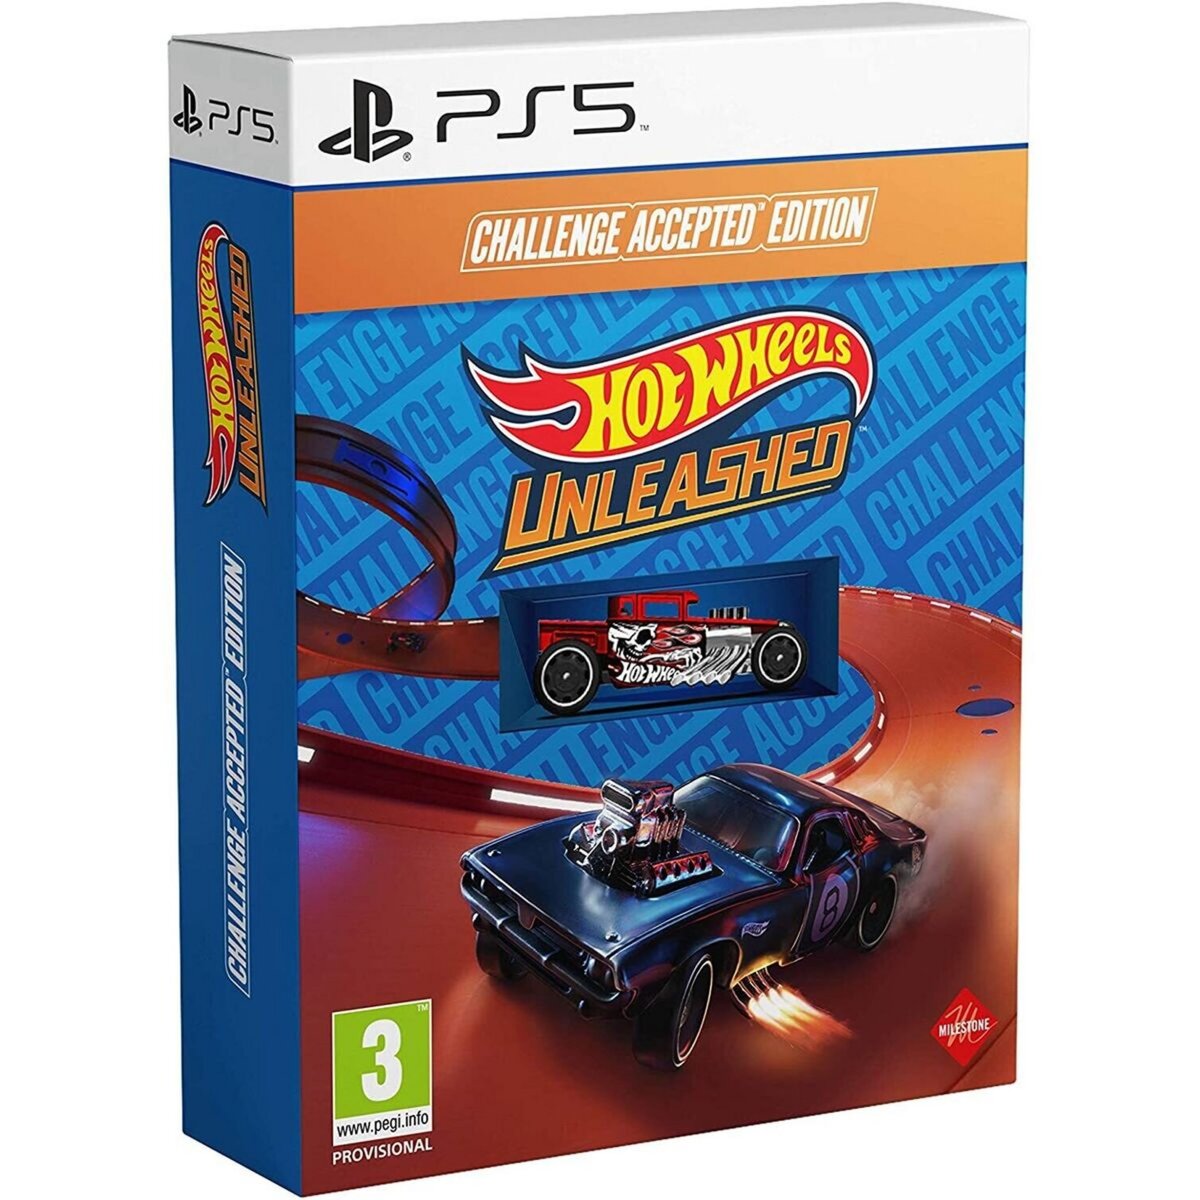 Hot Wheels Unleashed - Challenge Accepted Edition PS5